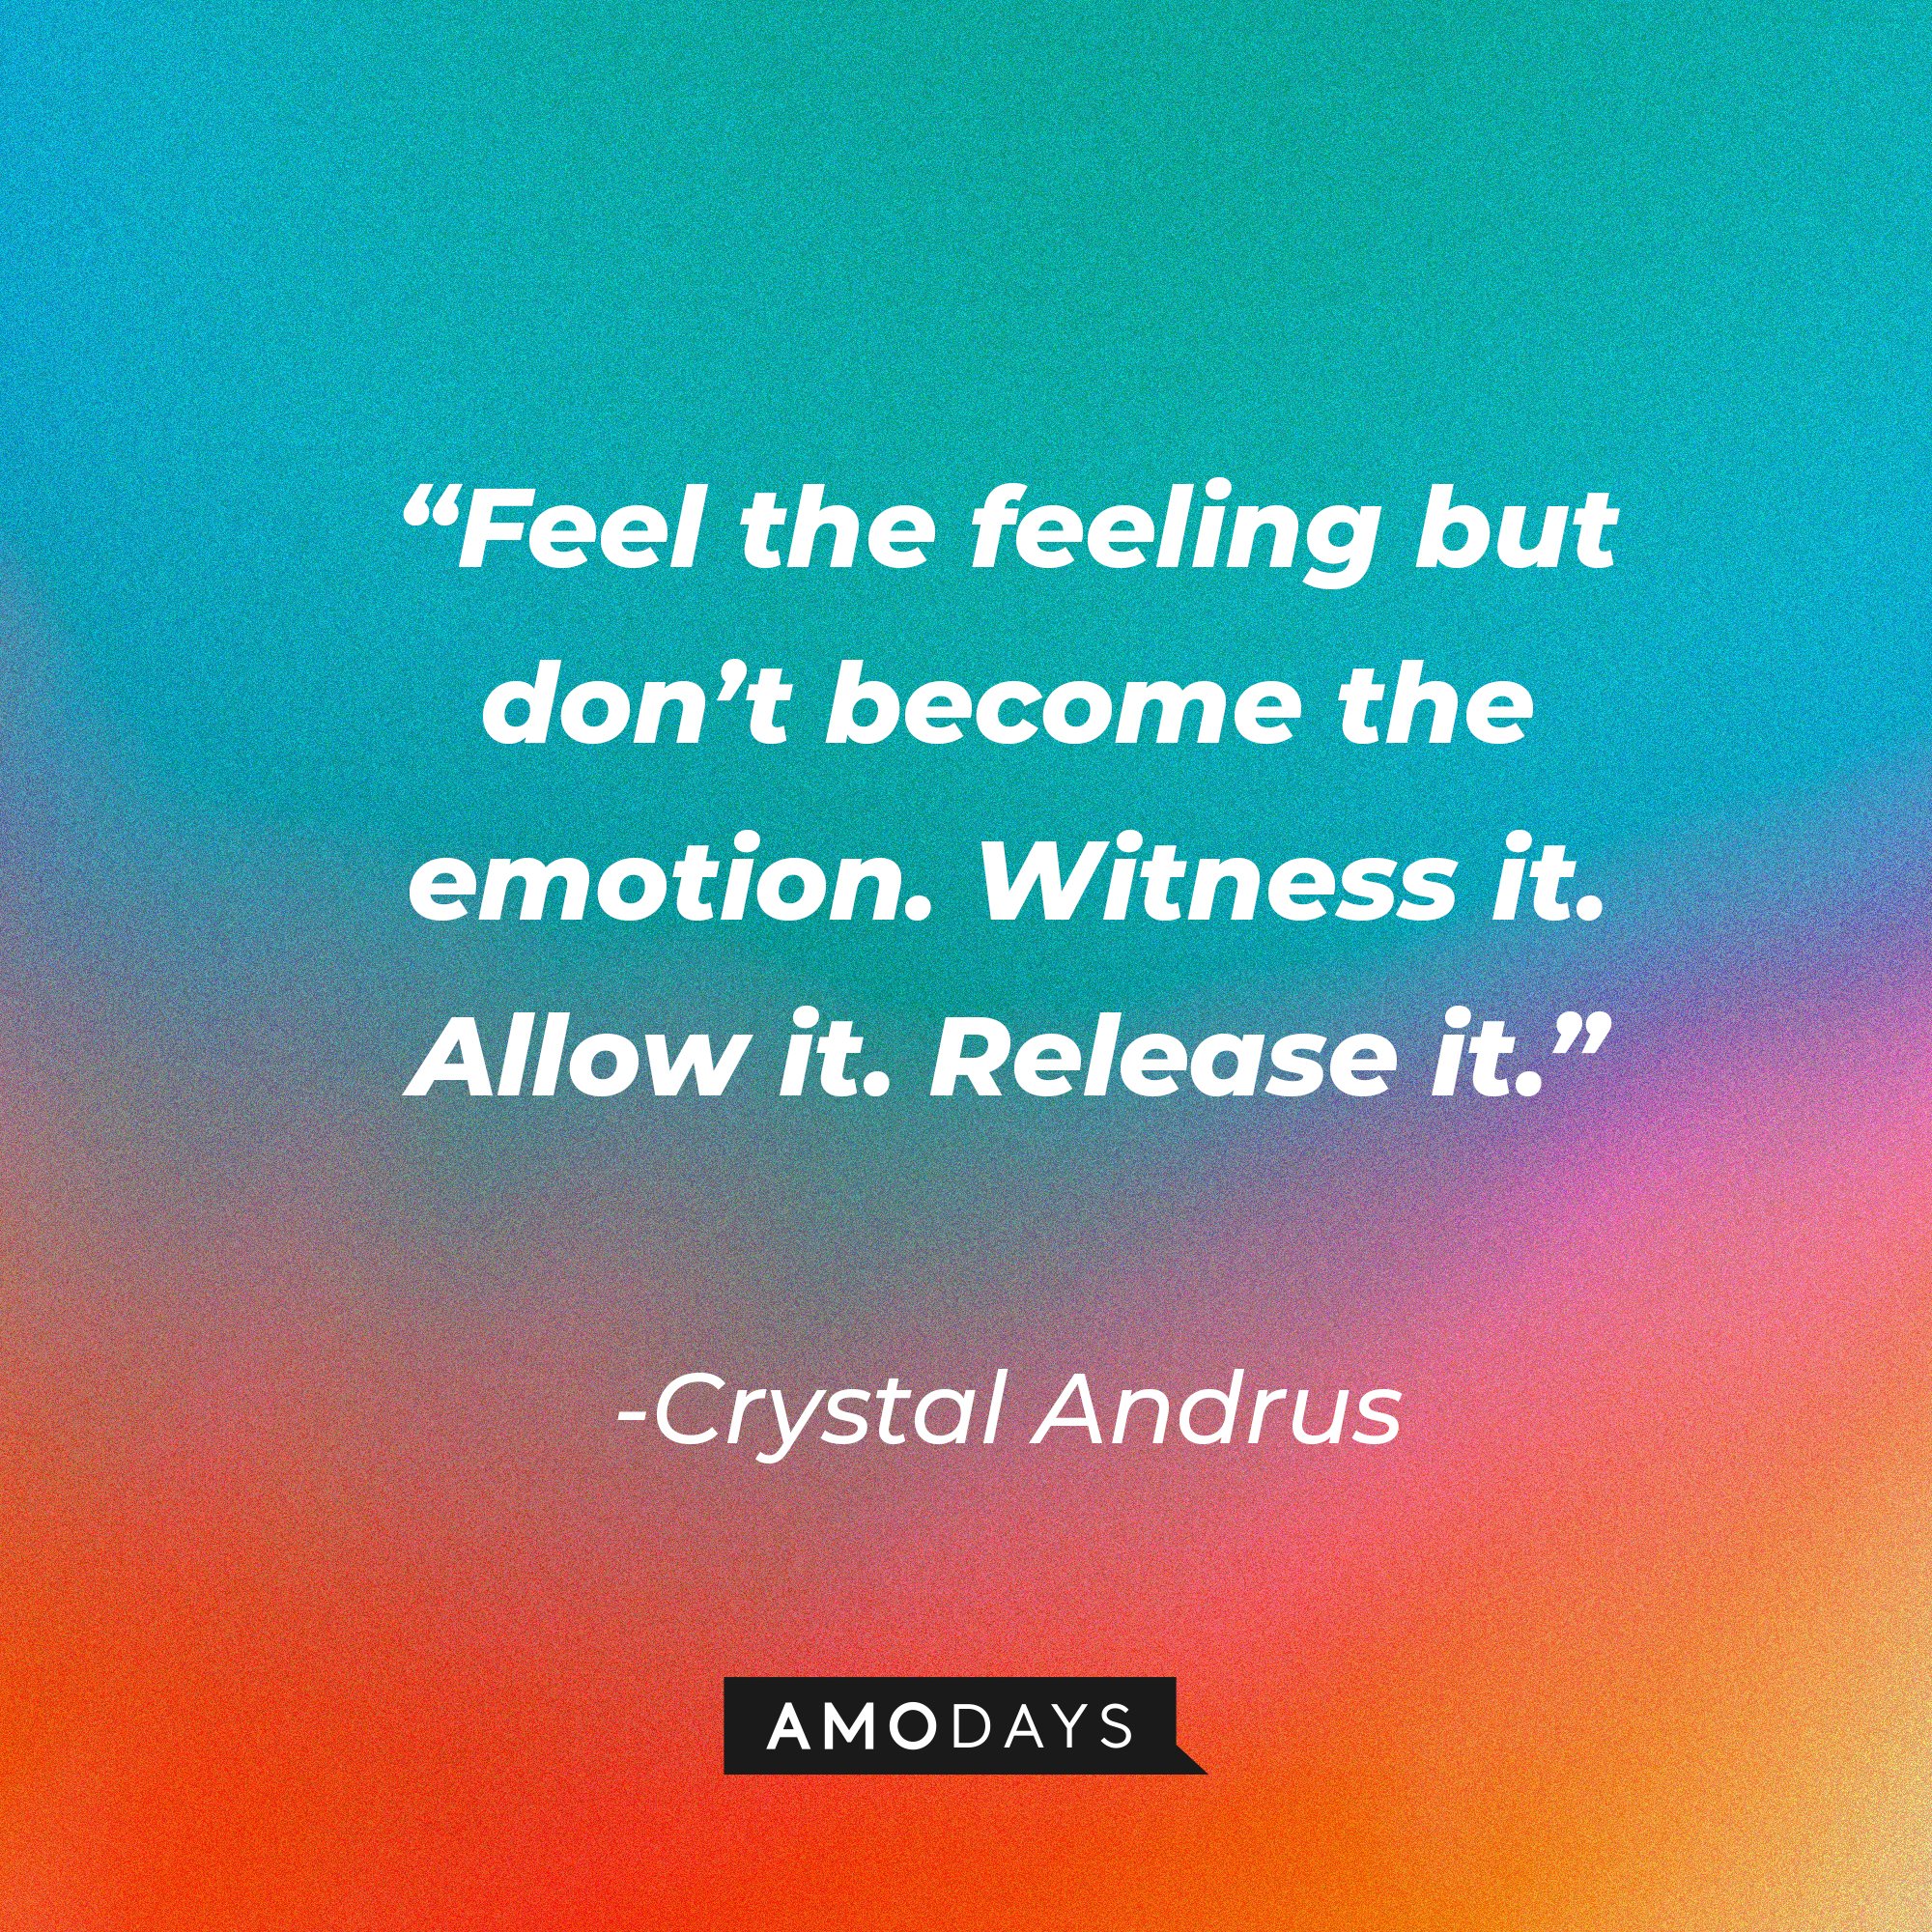 Crystal Andrus's quote: “Feel the feeling but don’t become the emotion. Witness it. Allow it. Release it.” | Image: AmoDays